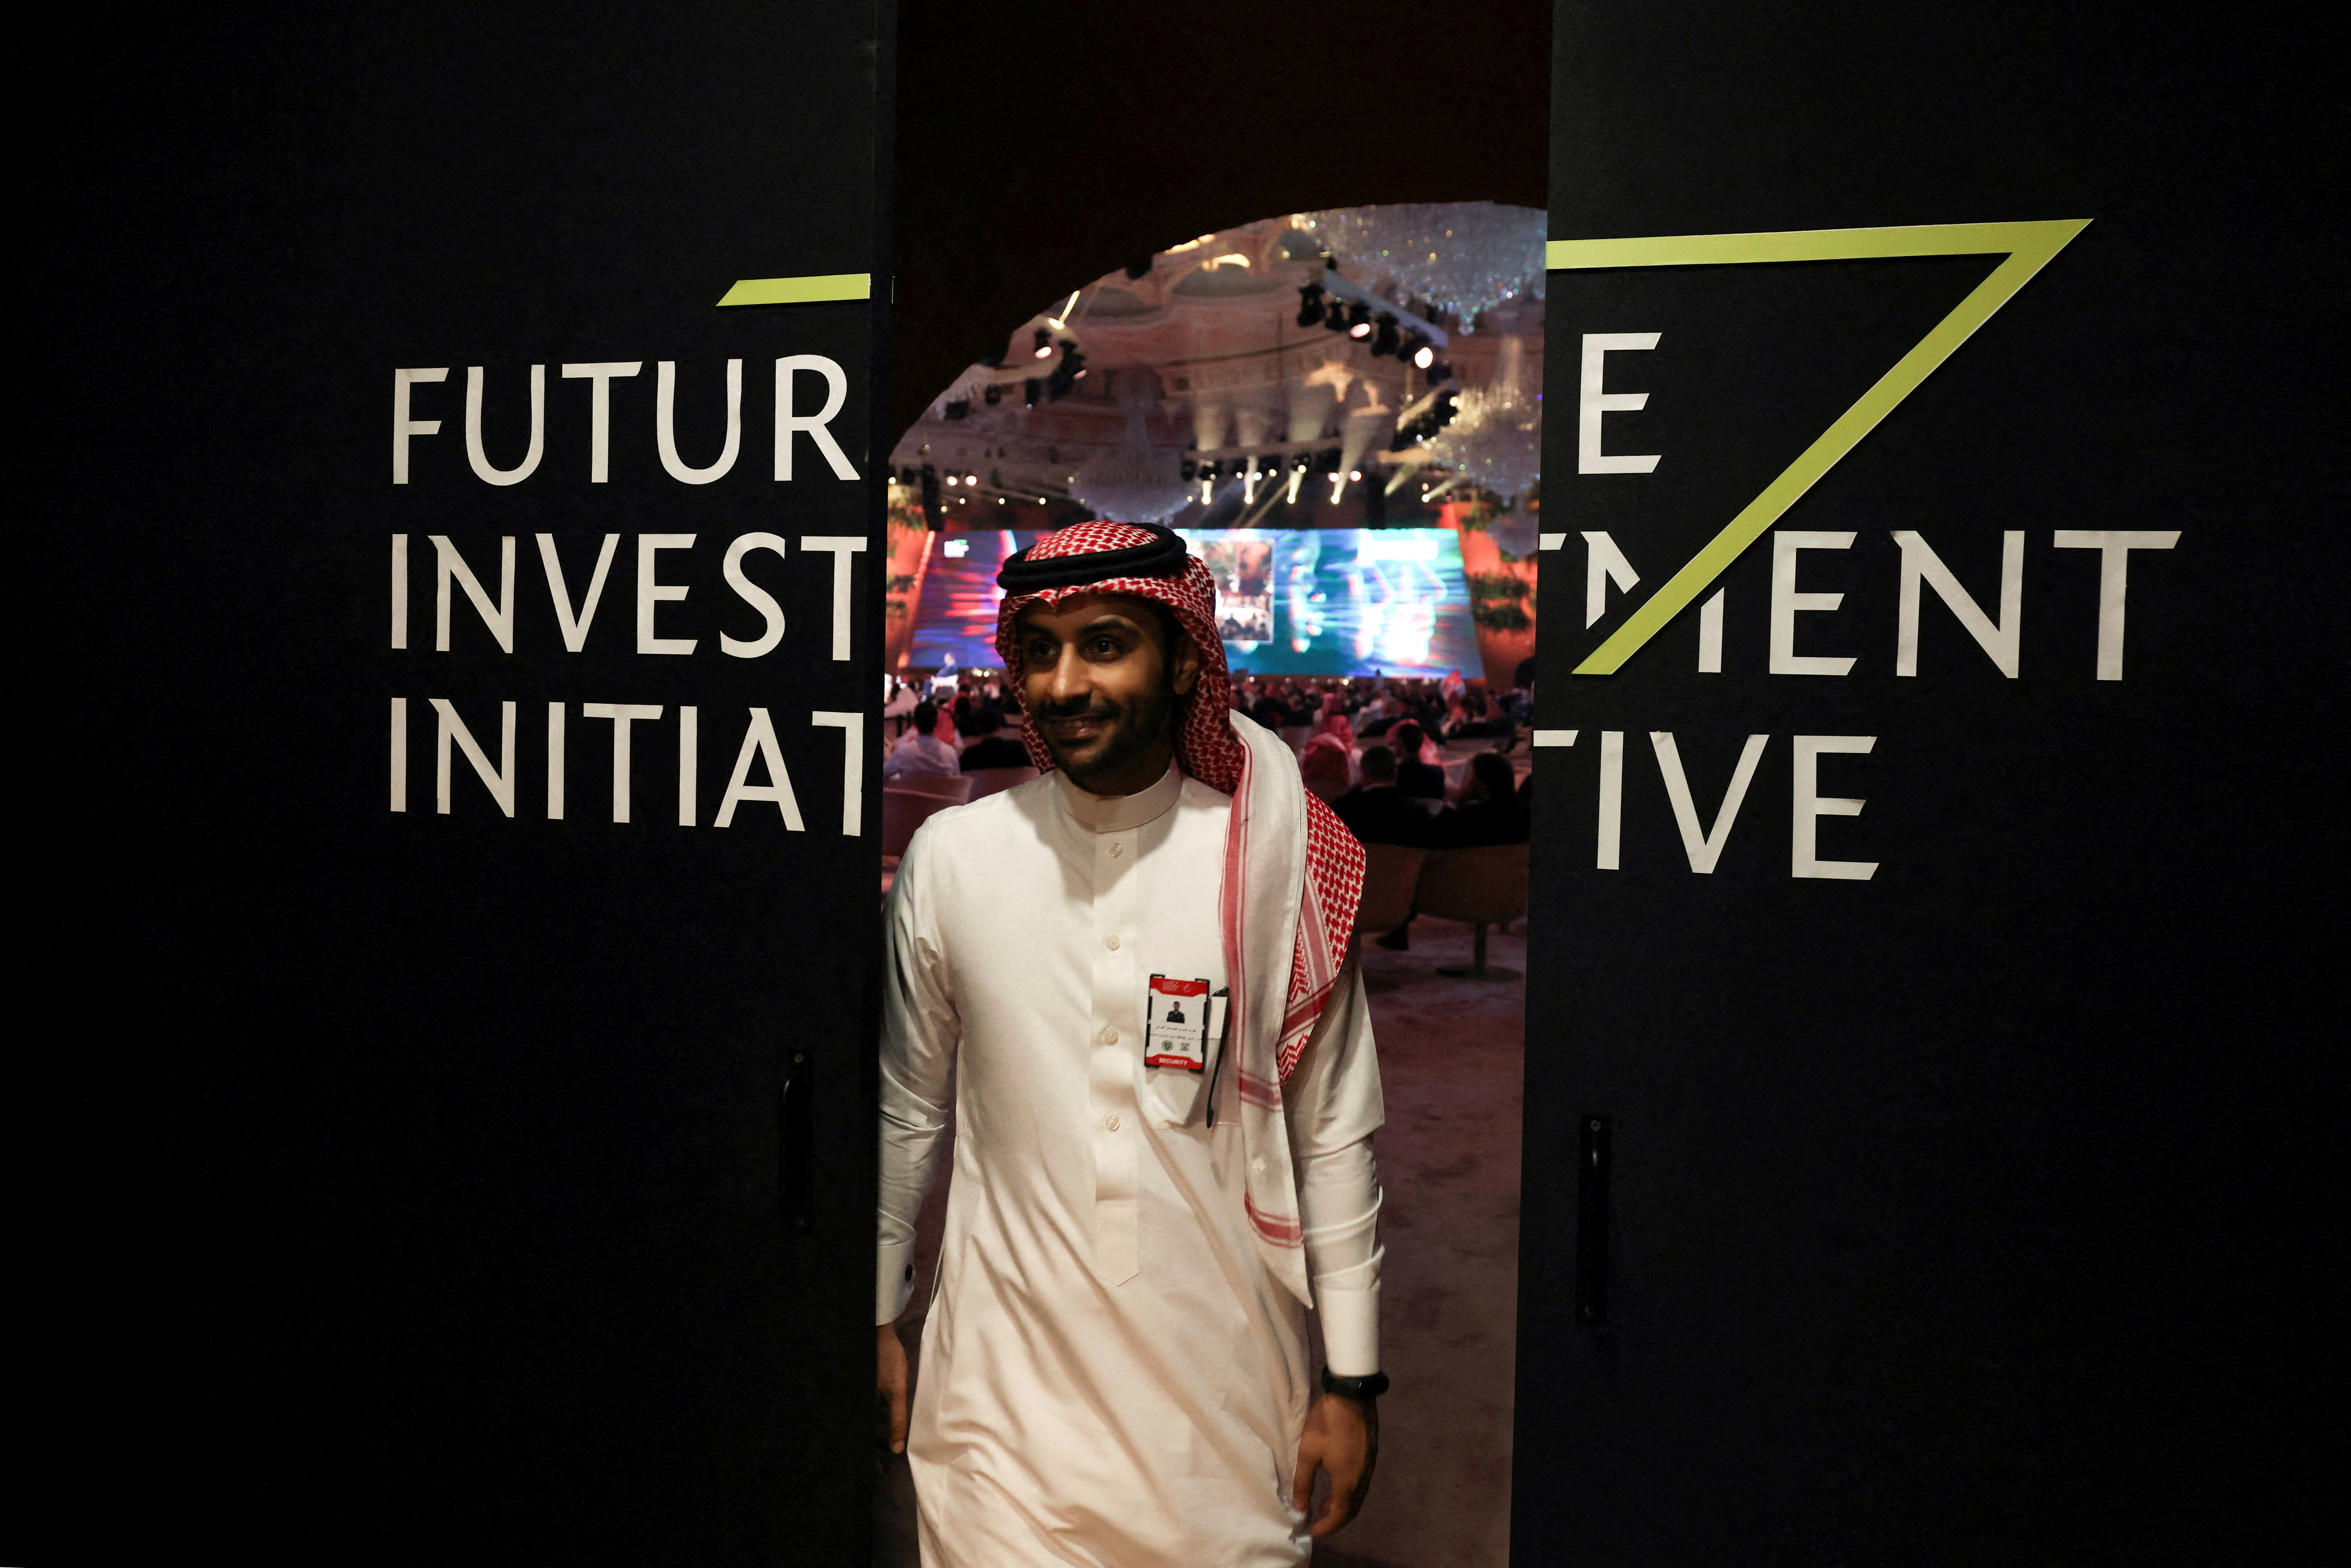 A Saudi man's reflection is seen in mirror glass at the Future Investment Initiative conference, in Riyadh, Saudi Arabia